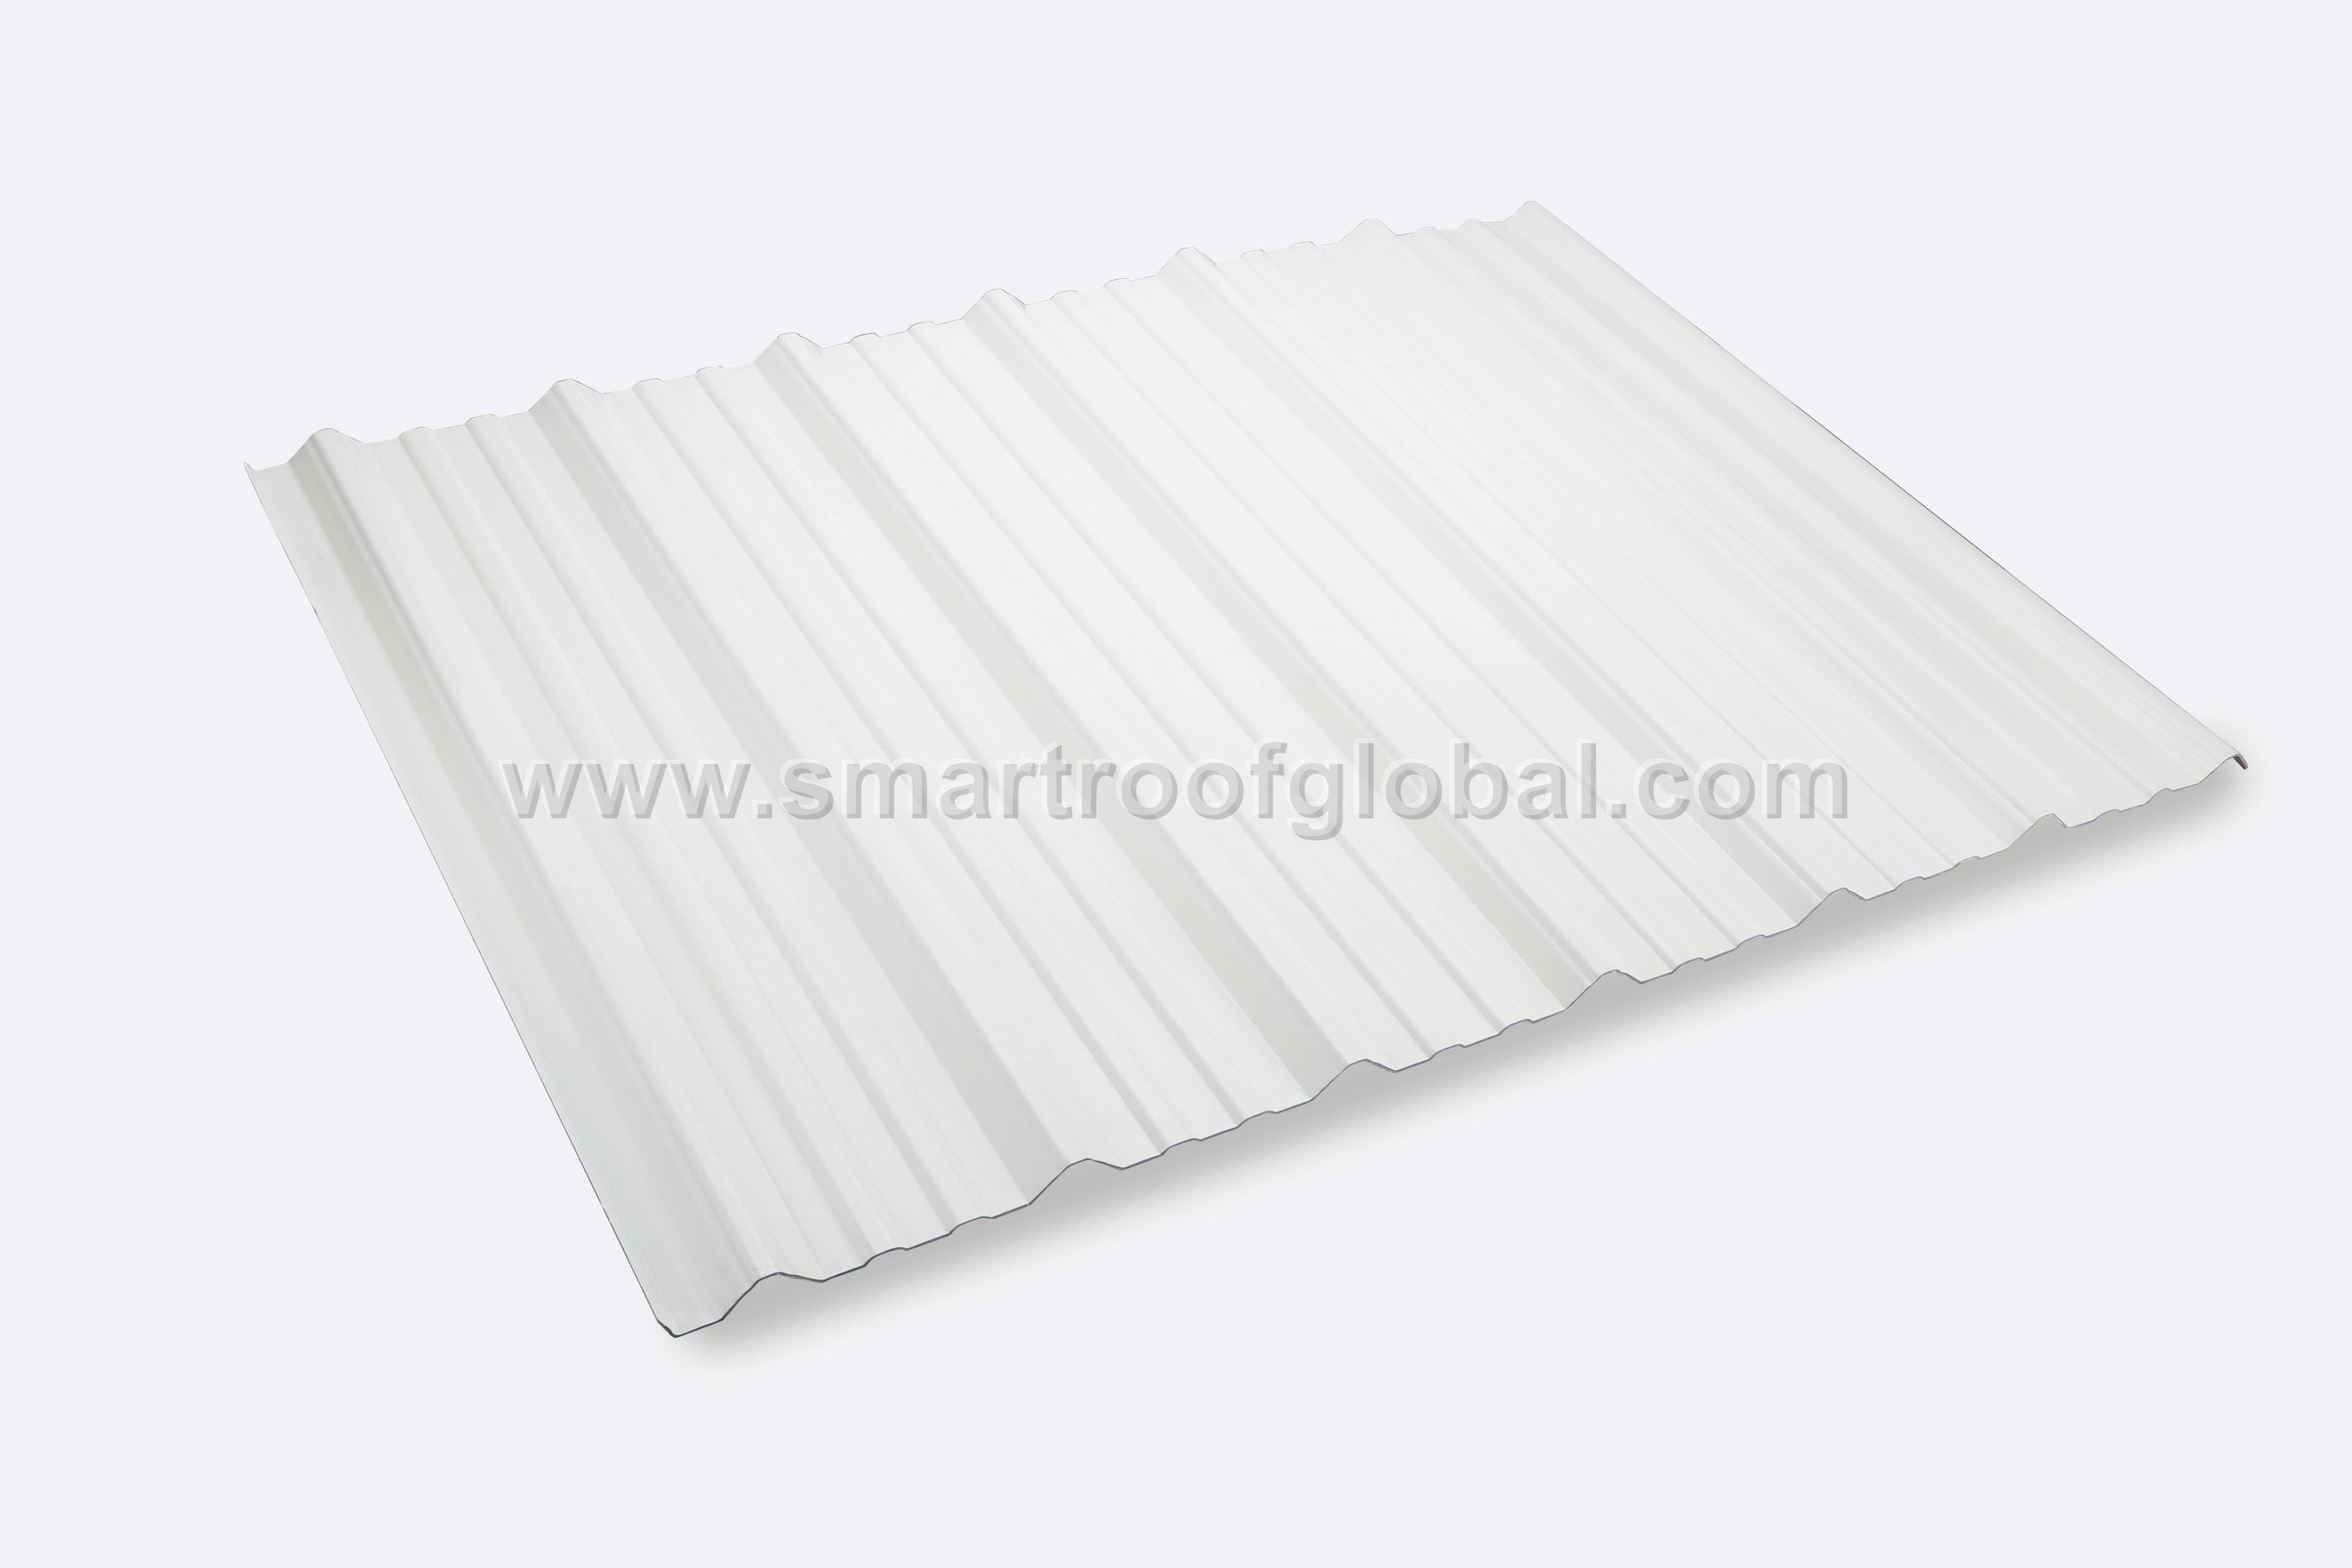 Corrugated Plastic Roofing Sheets, Corrugated Plastic Roofing Sheets Suppliers